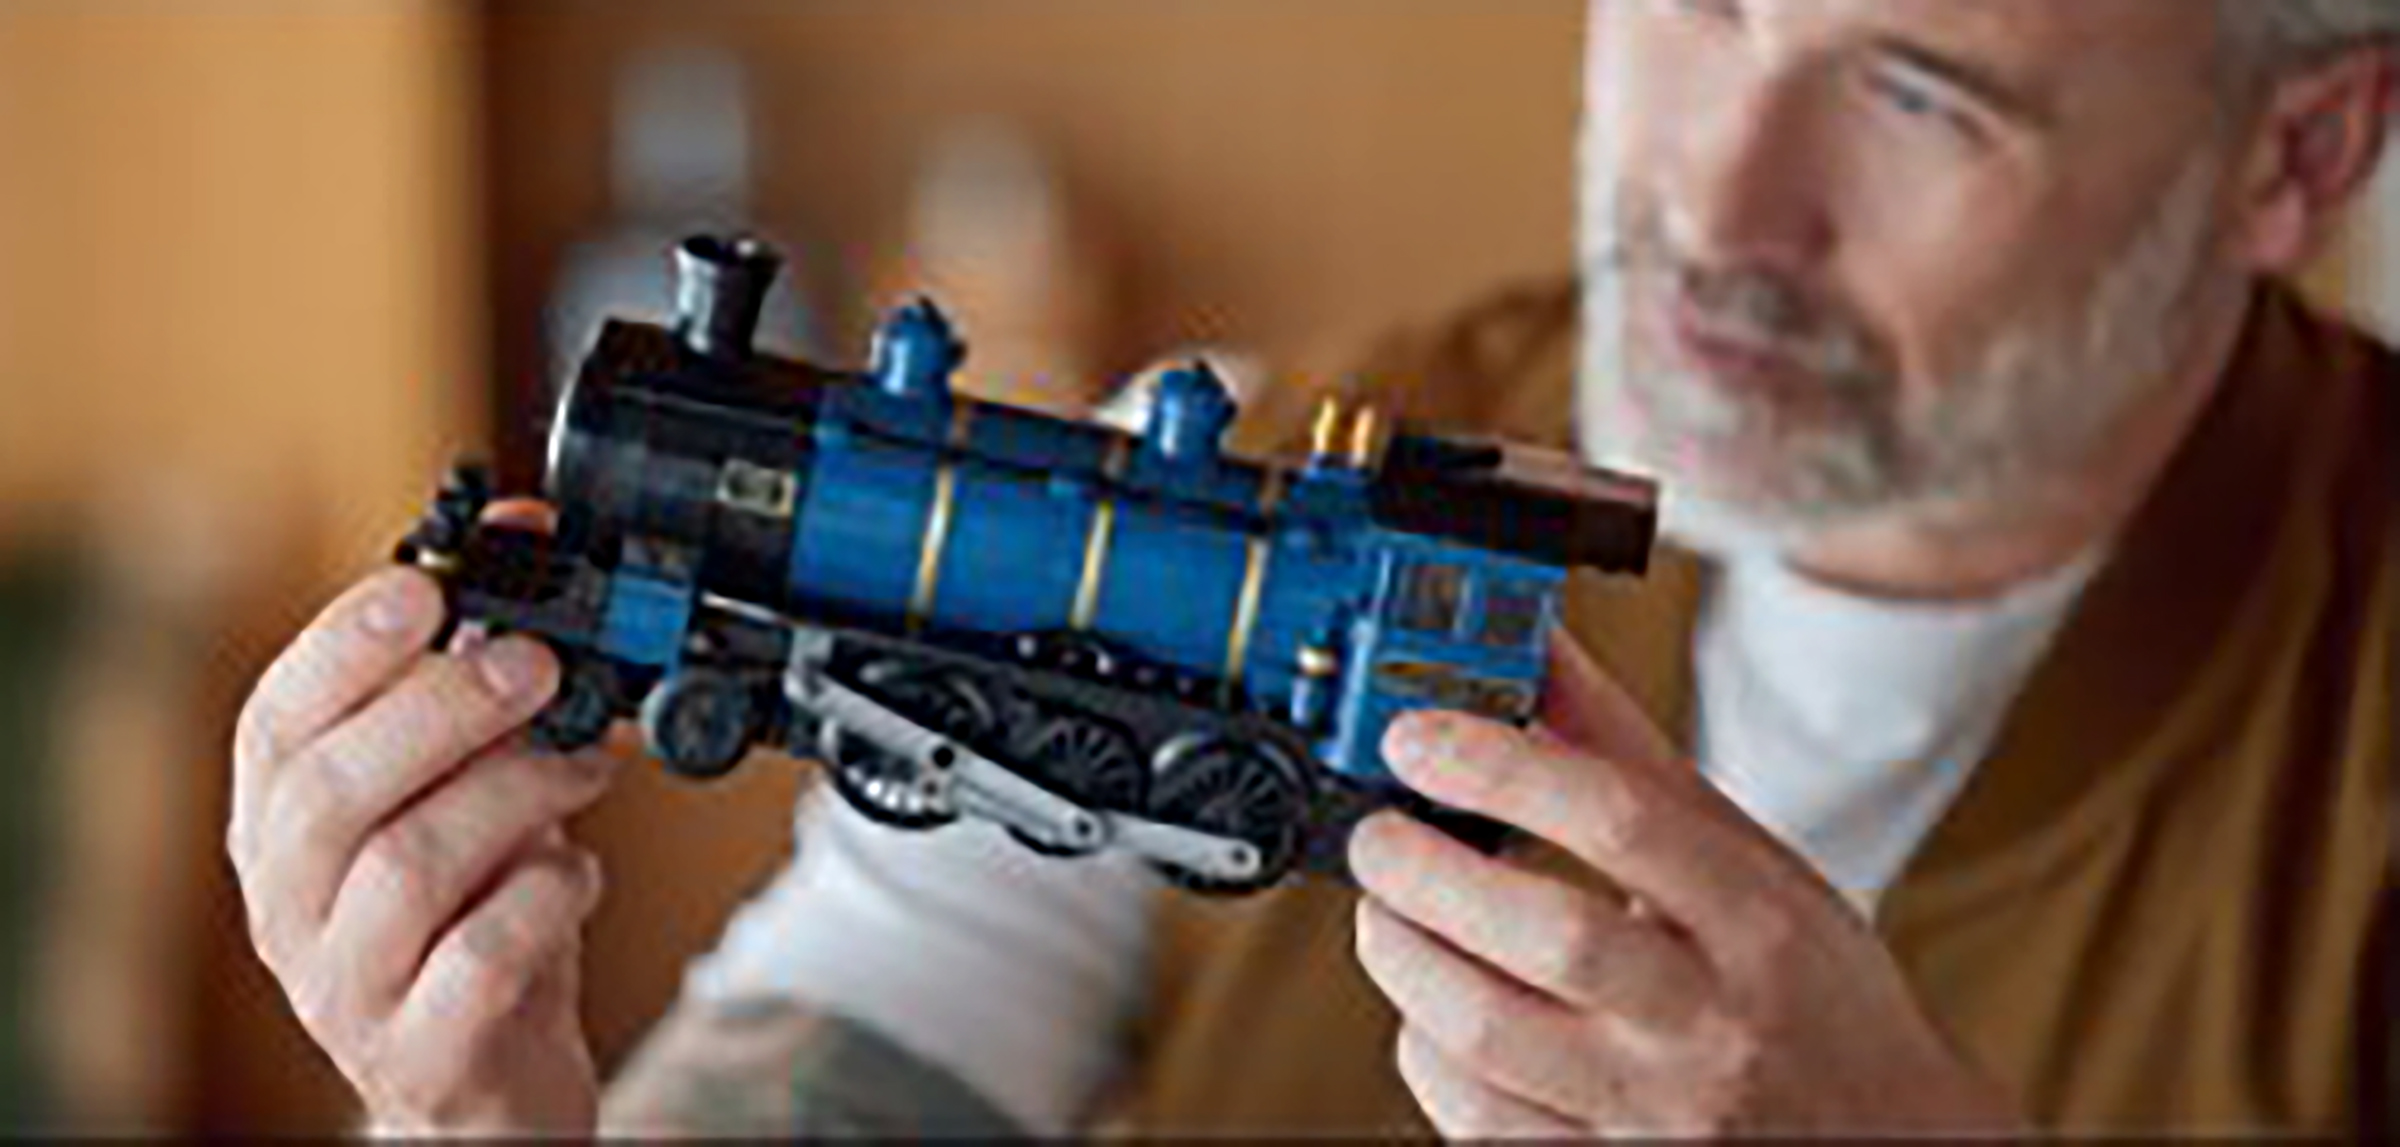 LEGO Ideas Orient Express set launching in November